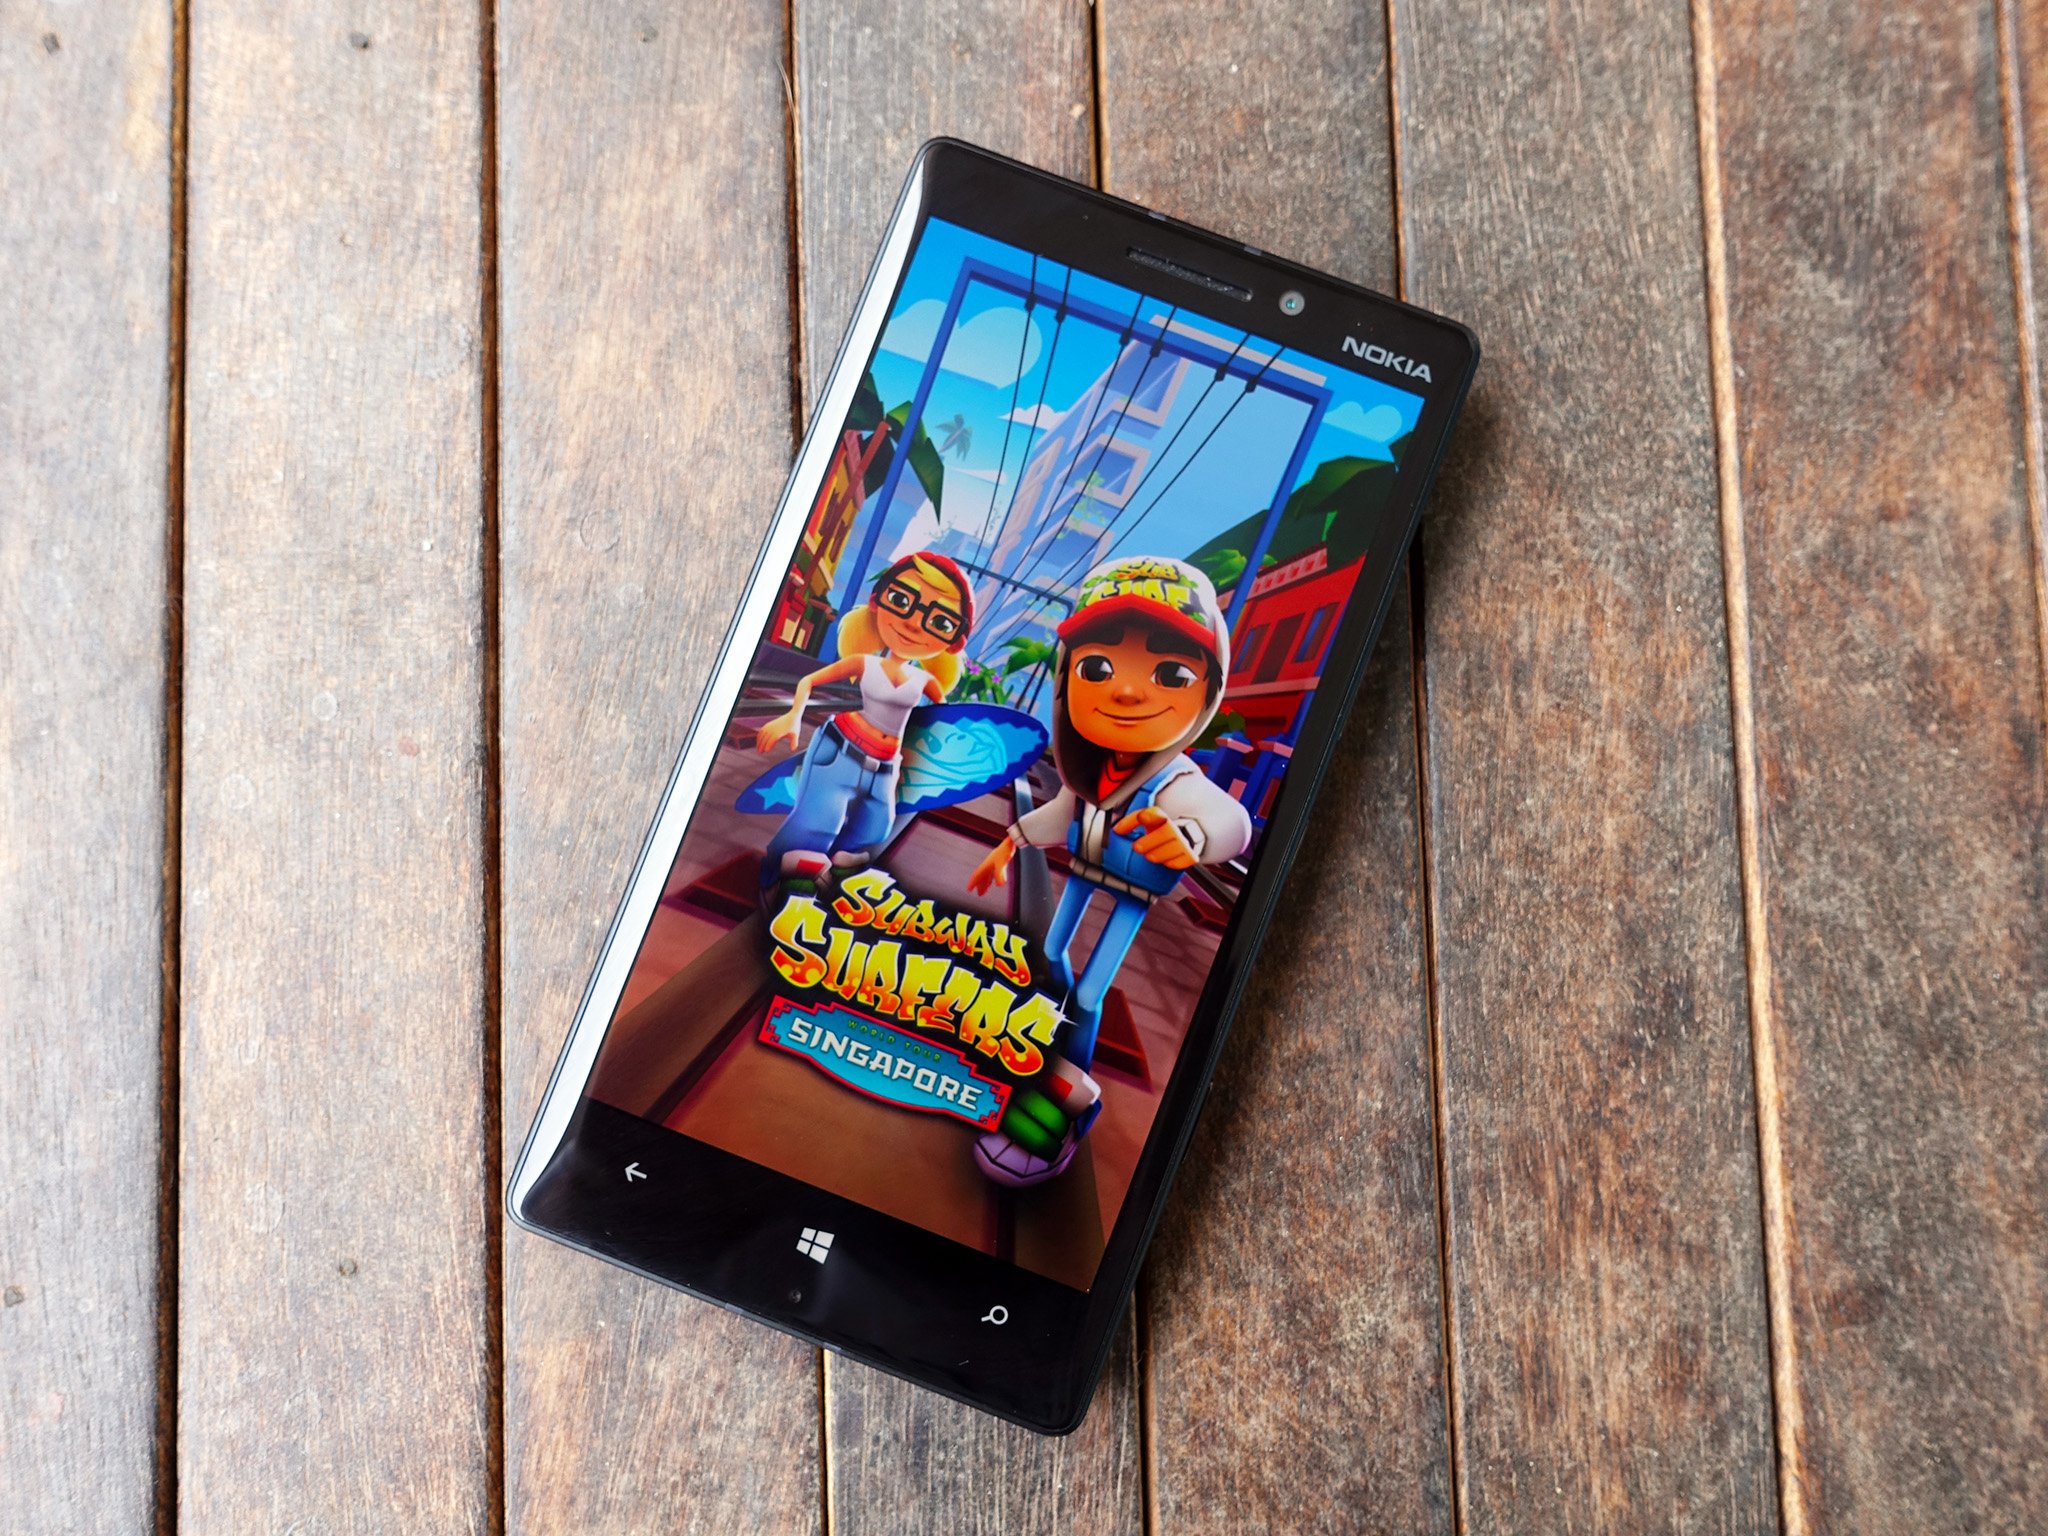 Subway Surfers review - All About Windows Phone